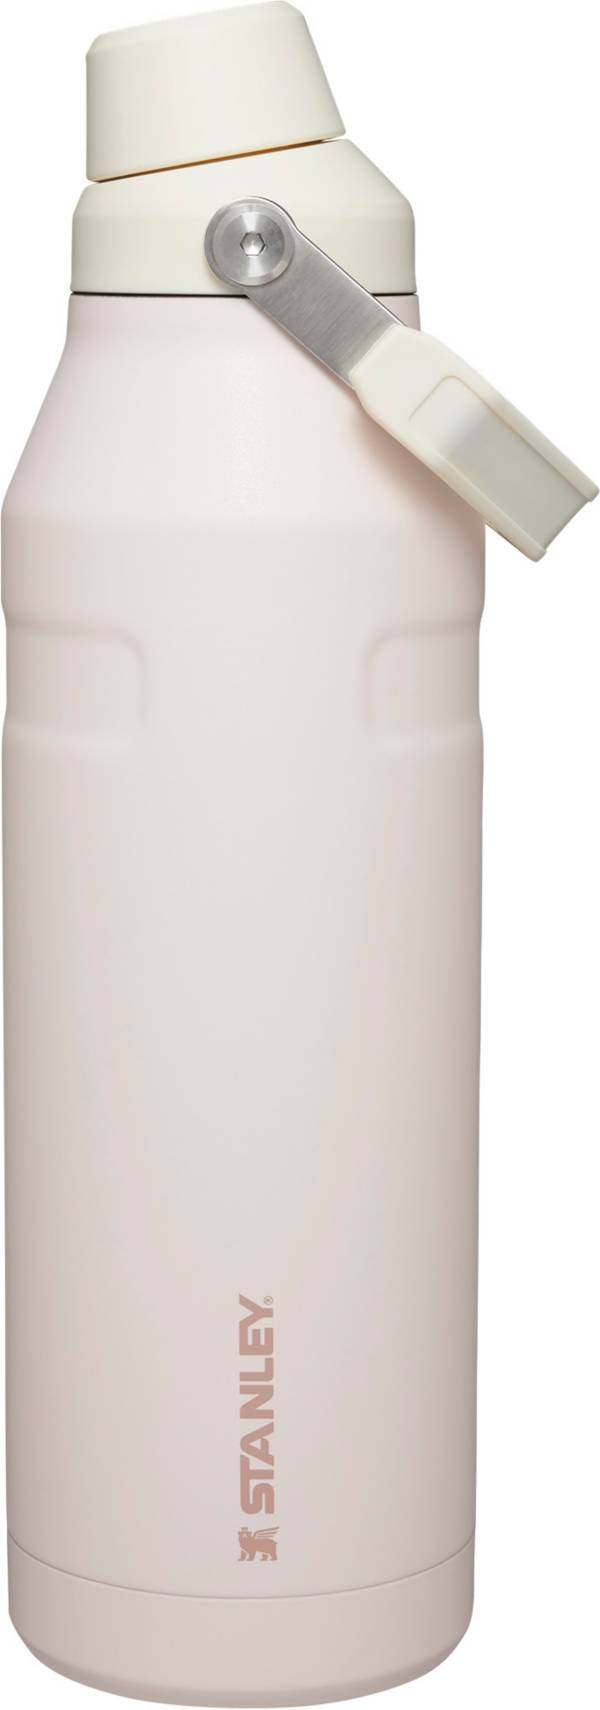 Stanley 50 oz. AeroLight IceFlow Bottle with Fast Flow Lid product image